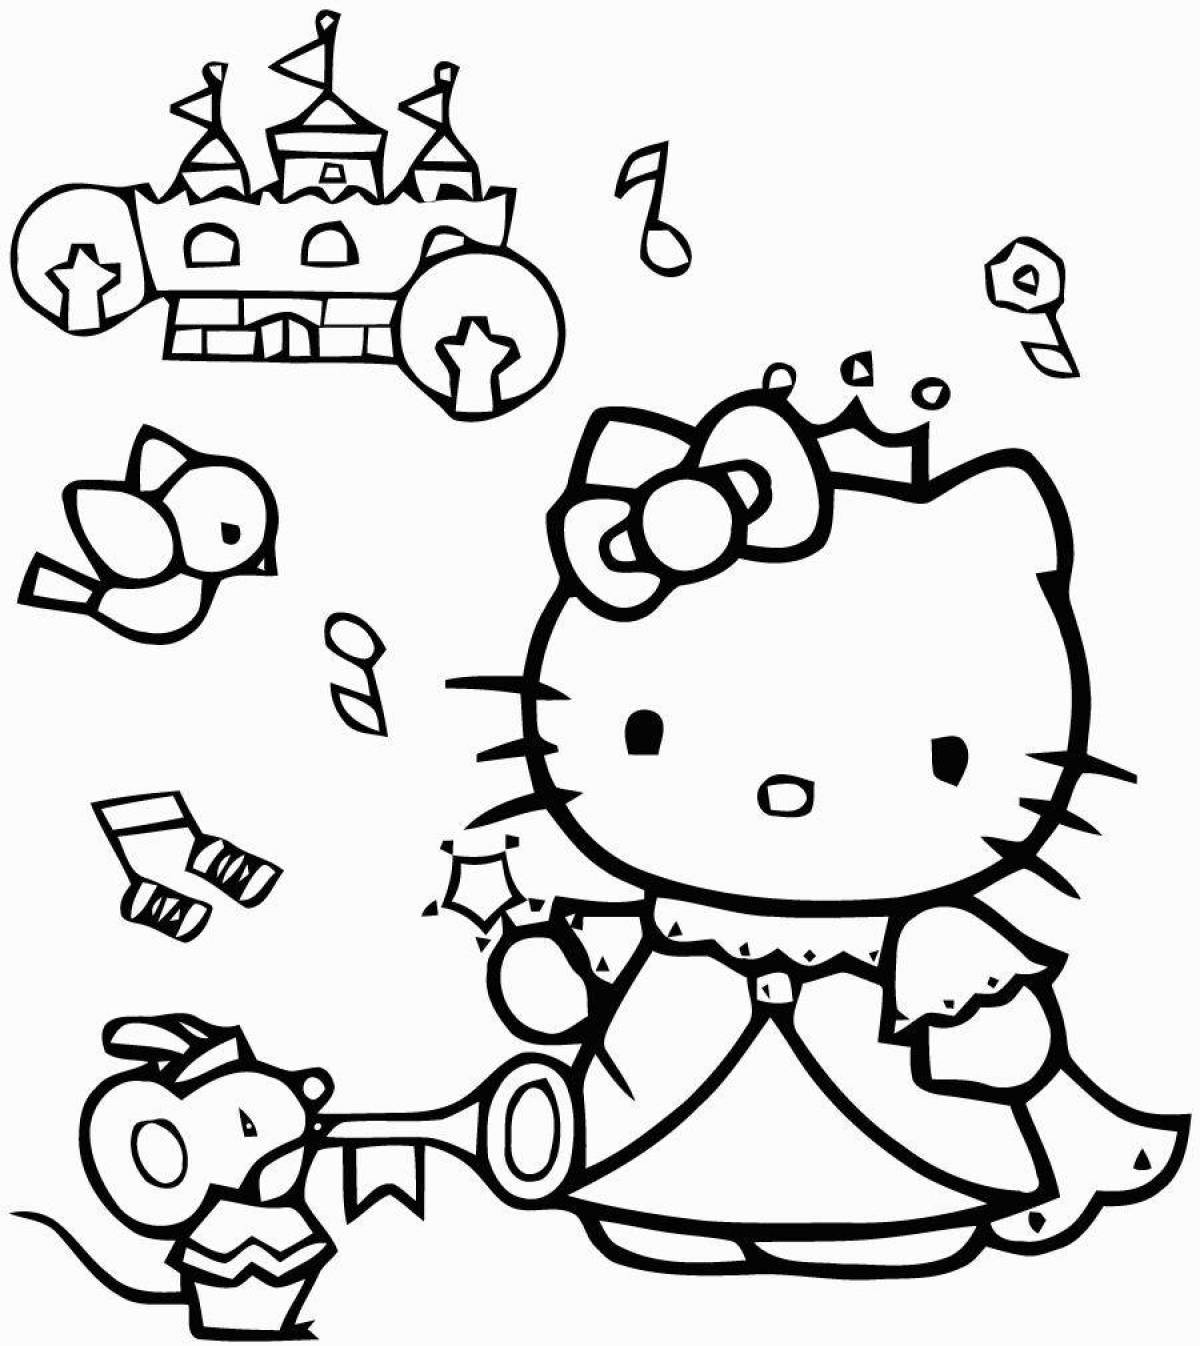 Awesome hello kitty coloring book